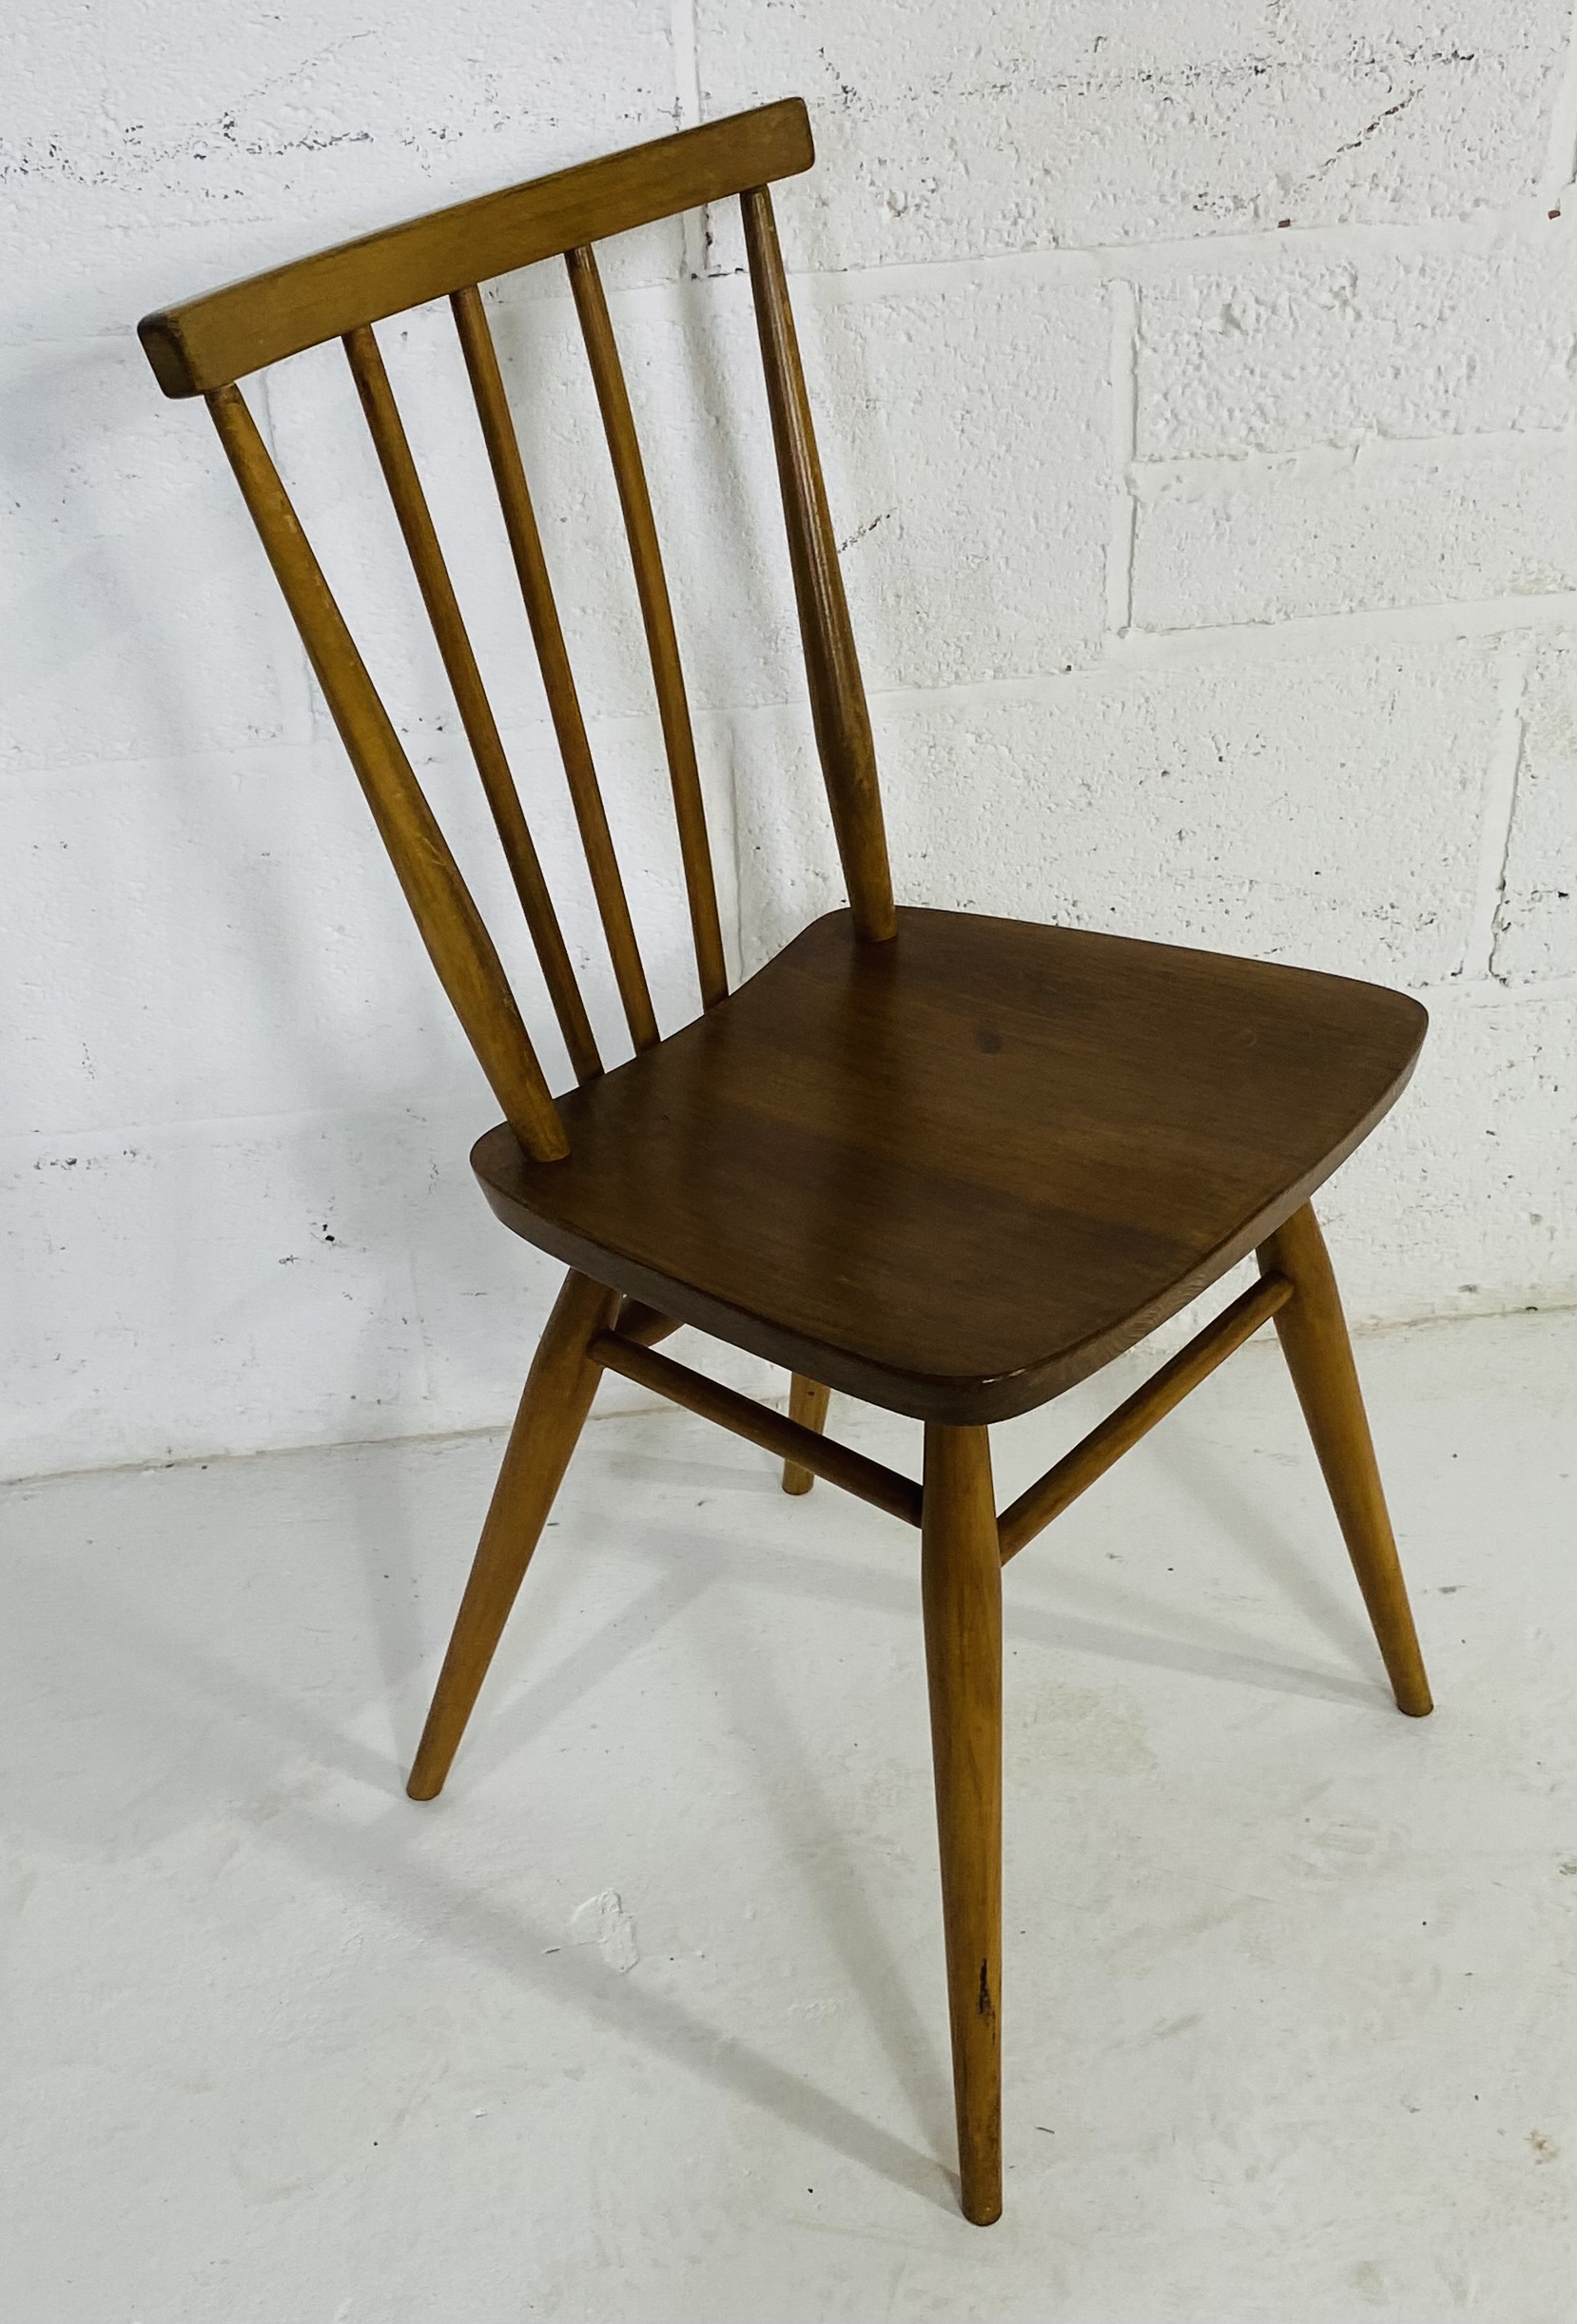 Three vintage Ercol chairs - Image 3 of 5